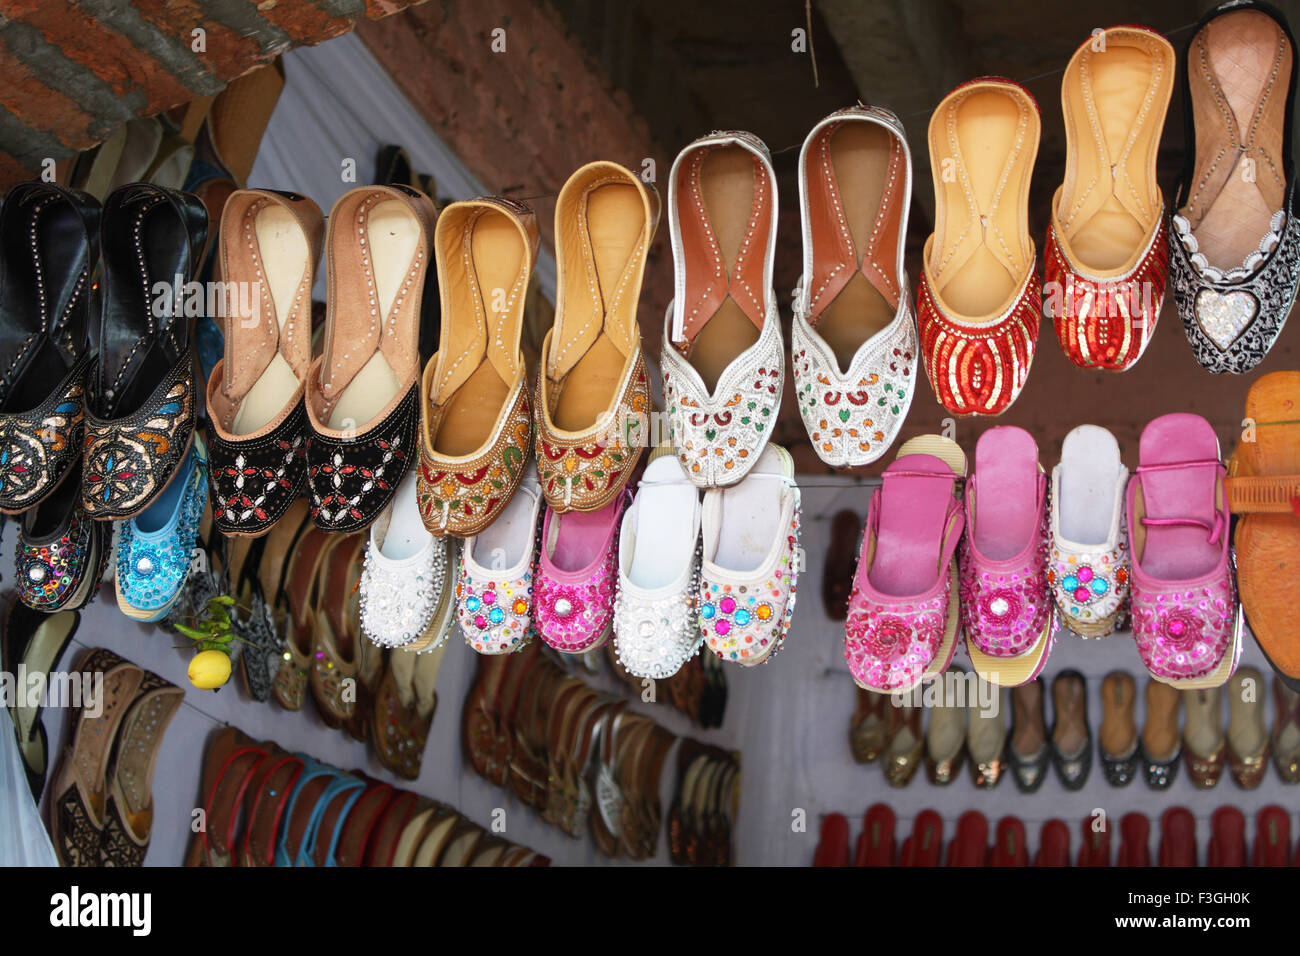 Shoes Stall High Resolution Stock Photography and Images - Alamy